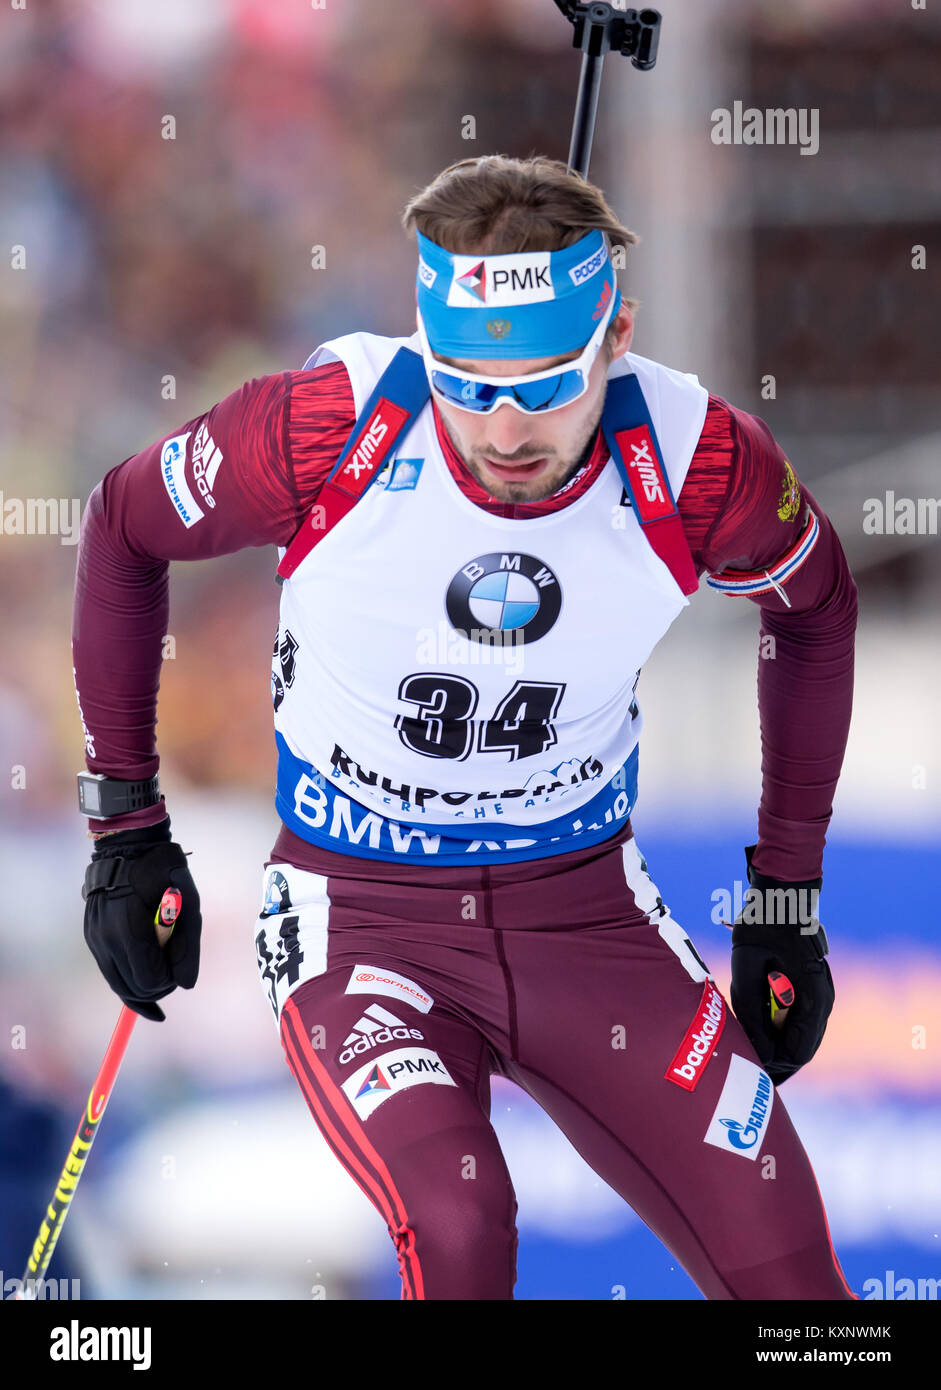 Ruhpolding, Germany. 11th Jan, 2018. Biathlet Anton Schipulin from Rusia skis during the race at Chiemgau Arena in Ruhpolding, Germany, 11 January 2018. Credit: Sven Hoppe/dpa/Alamy Live News Stock Photo